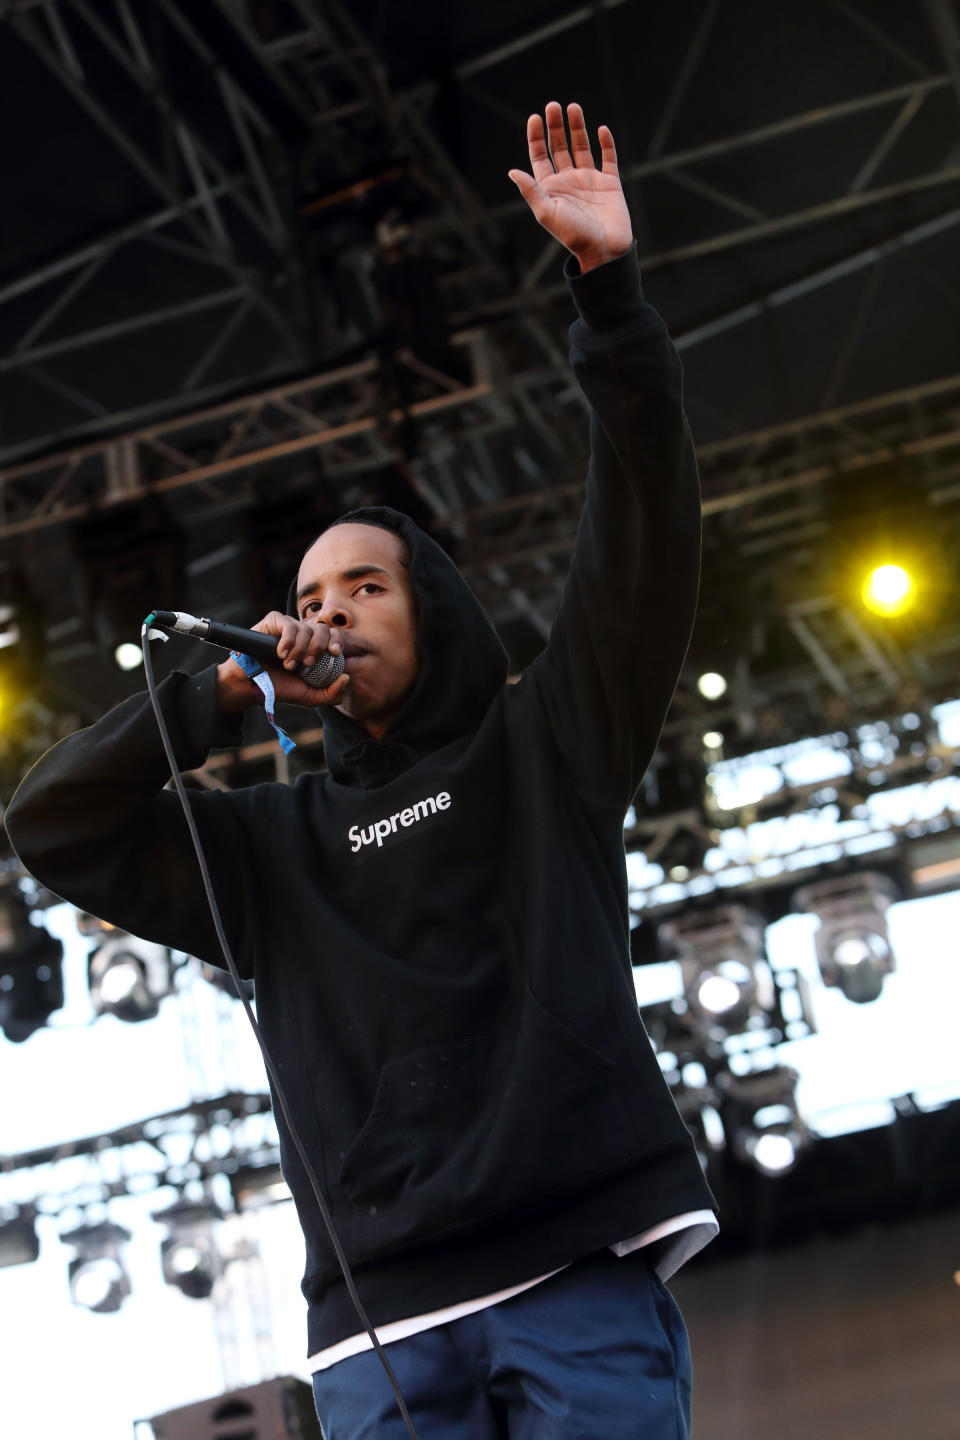 FILE - This May 26, 2013 file photo shows Earl Sweatshirt performing at The Sasquatch! Music Festival in George, Wash. Hip-hop's troubled prince says during a recent phone interview that having his much-anticipated major label debut "Doris" out is a relief and everything has been perfect in the time since it debuted at No. 5 on the Billboard 200 chart. (Photo by John Davisson/Invision/AP, File)